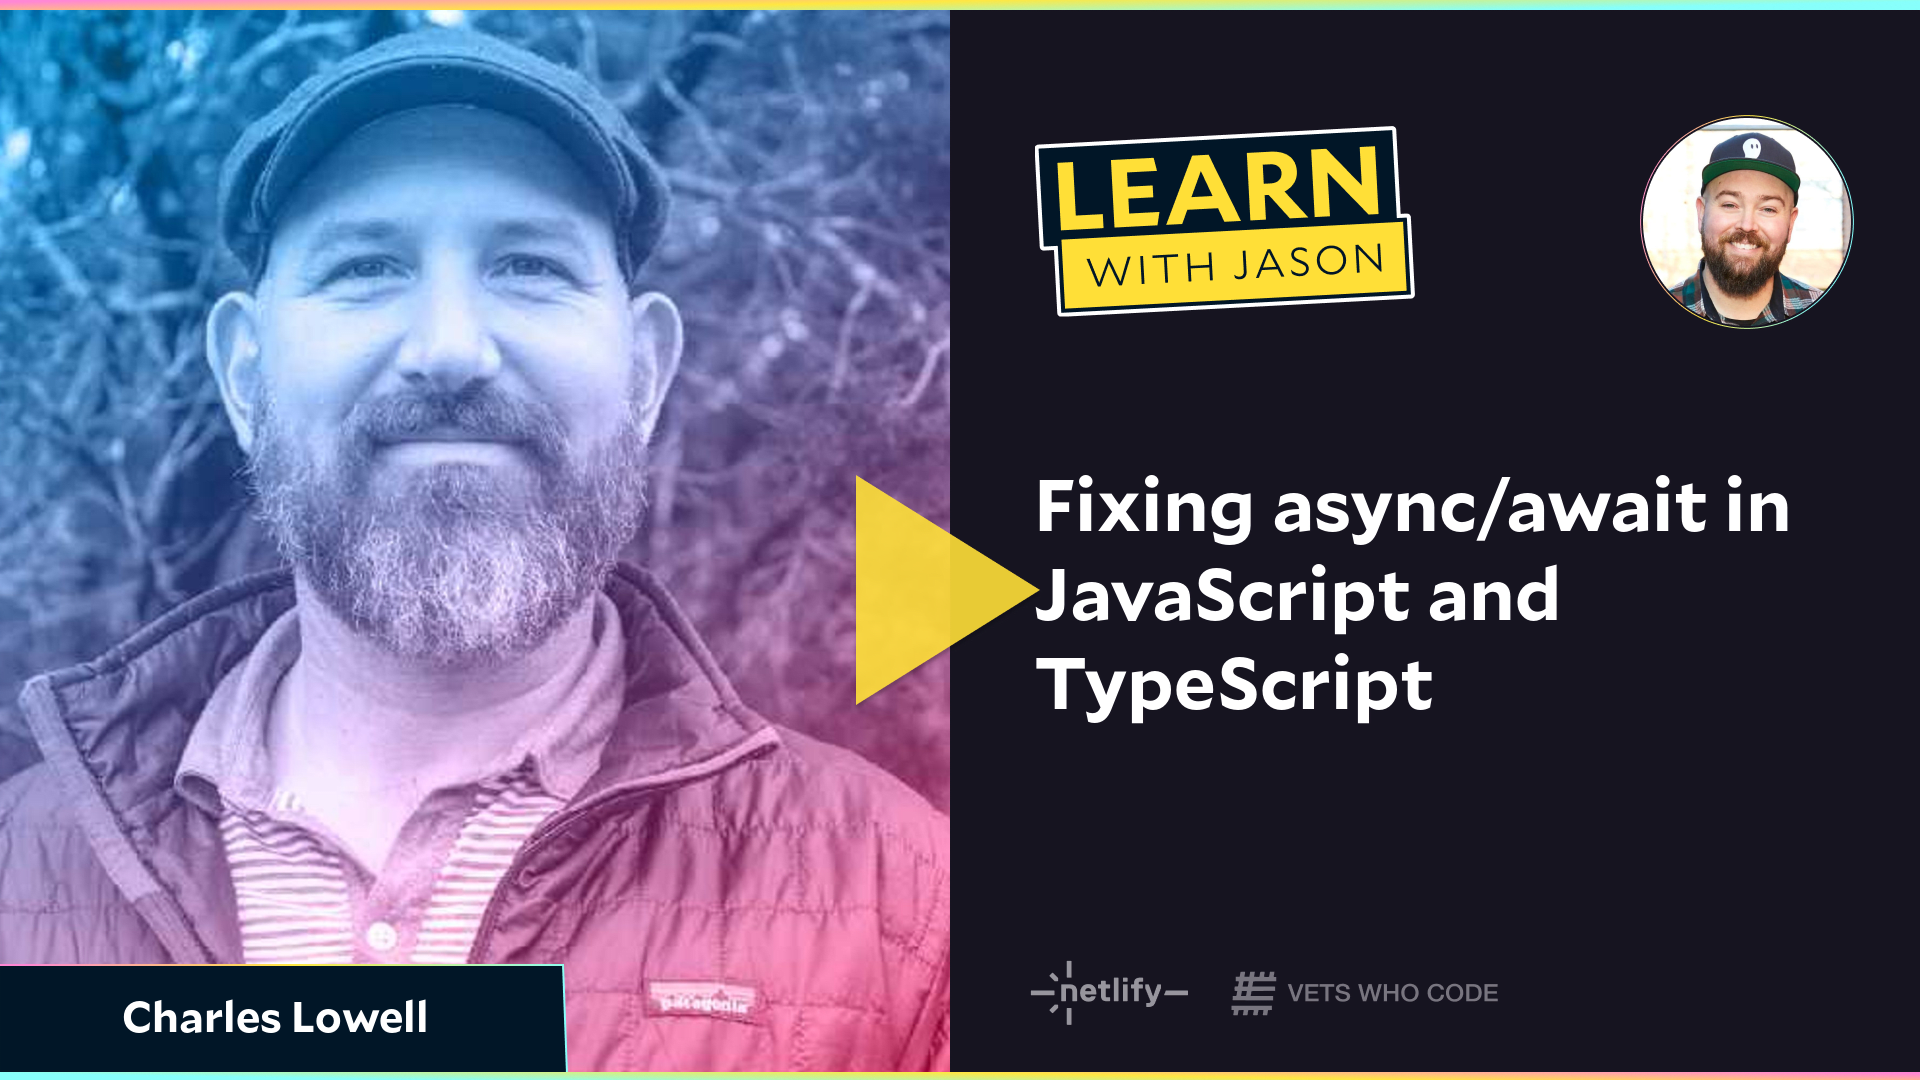 Fixing async/await in JavaScript and TypeScript (with Charles Lowell)